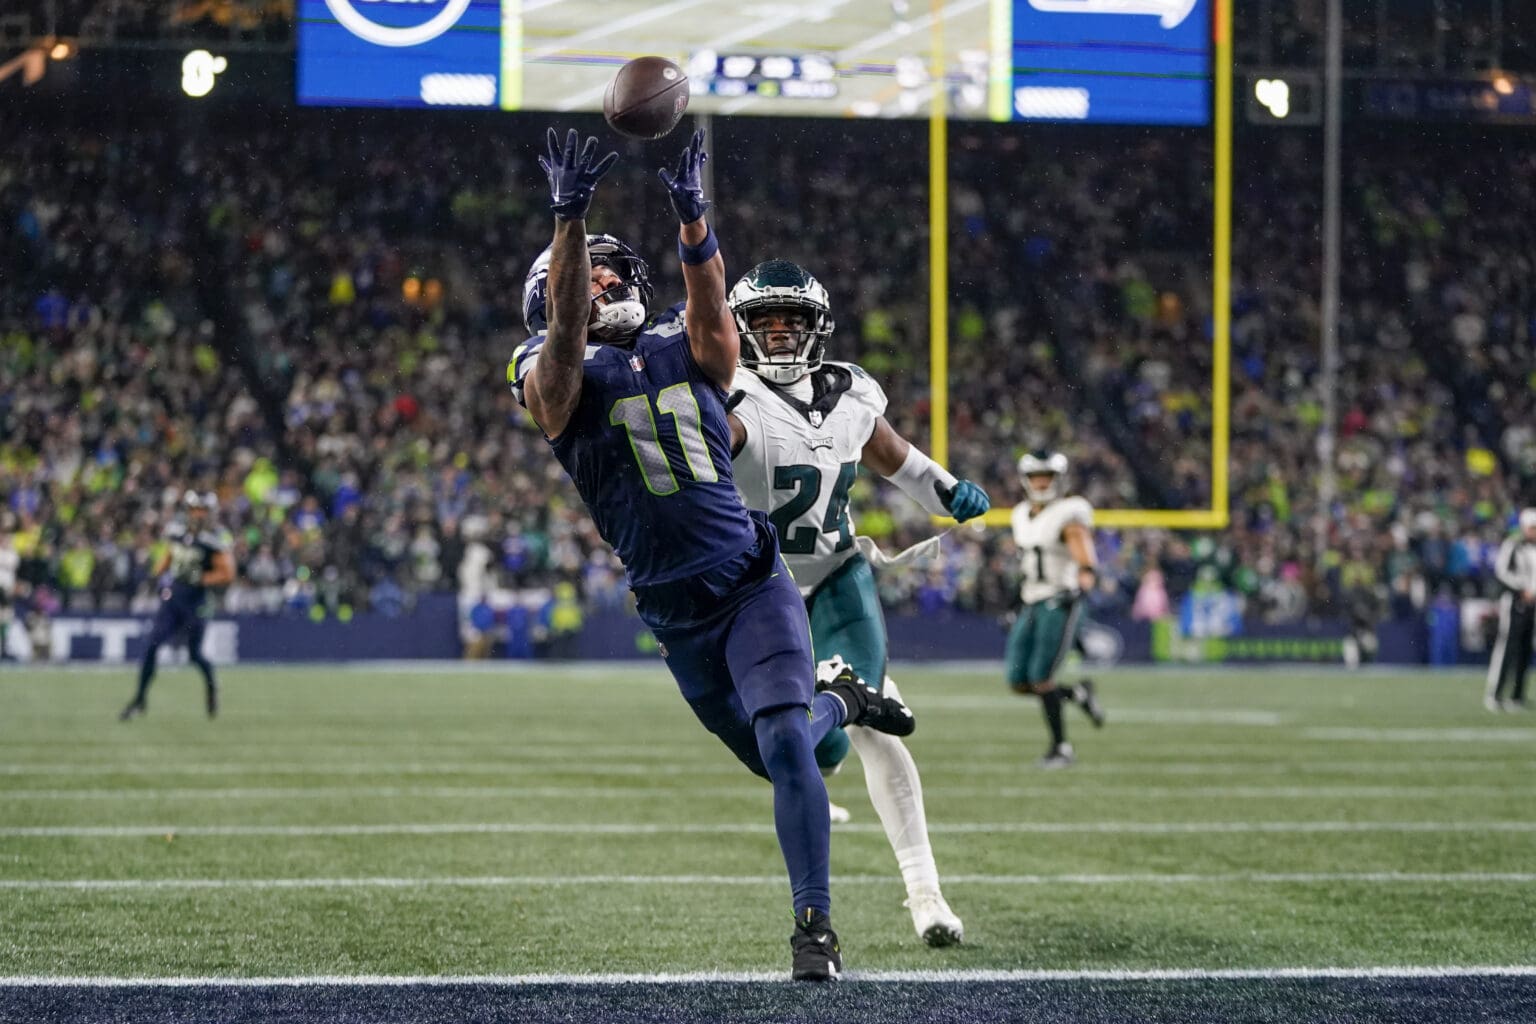 Seattle Seahawks wide receiver Jaxon Smith-Njigba (11) makes a touchdown catch in front of Philadelphia Eagles cornerback James Bradberry (24) as he reaches out to try and prevent him from catching it as other players watch on from behind them.